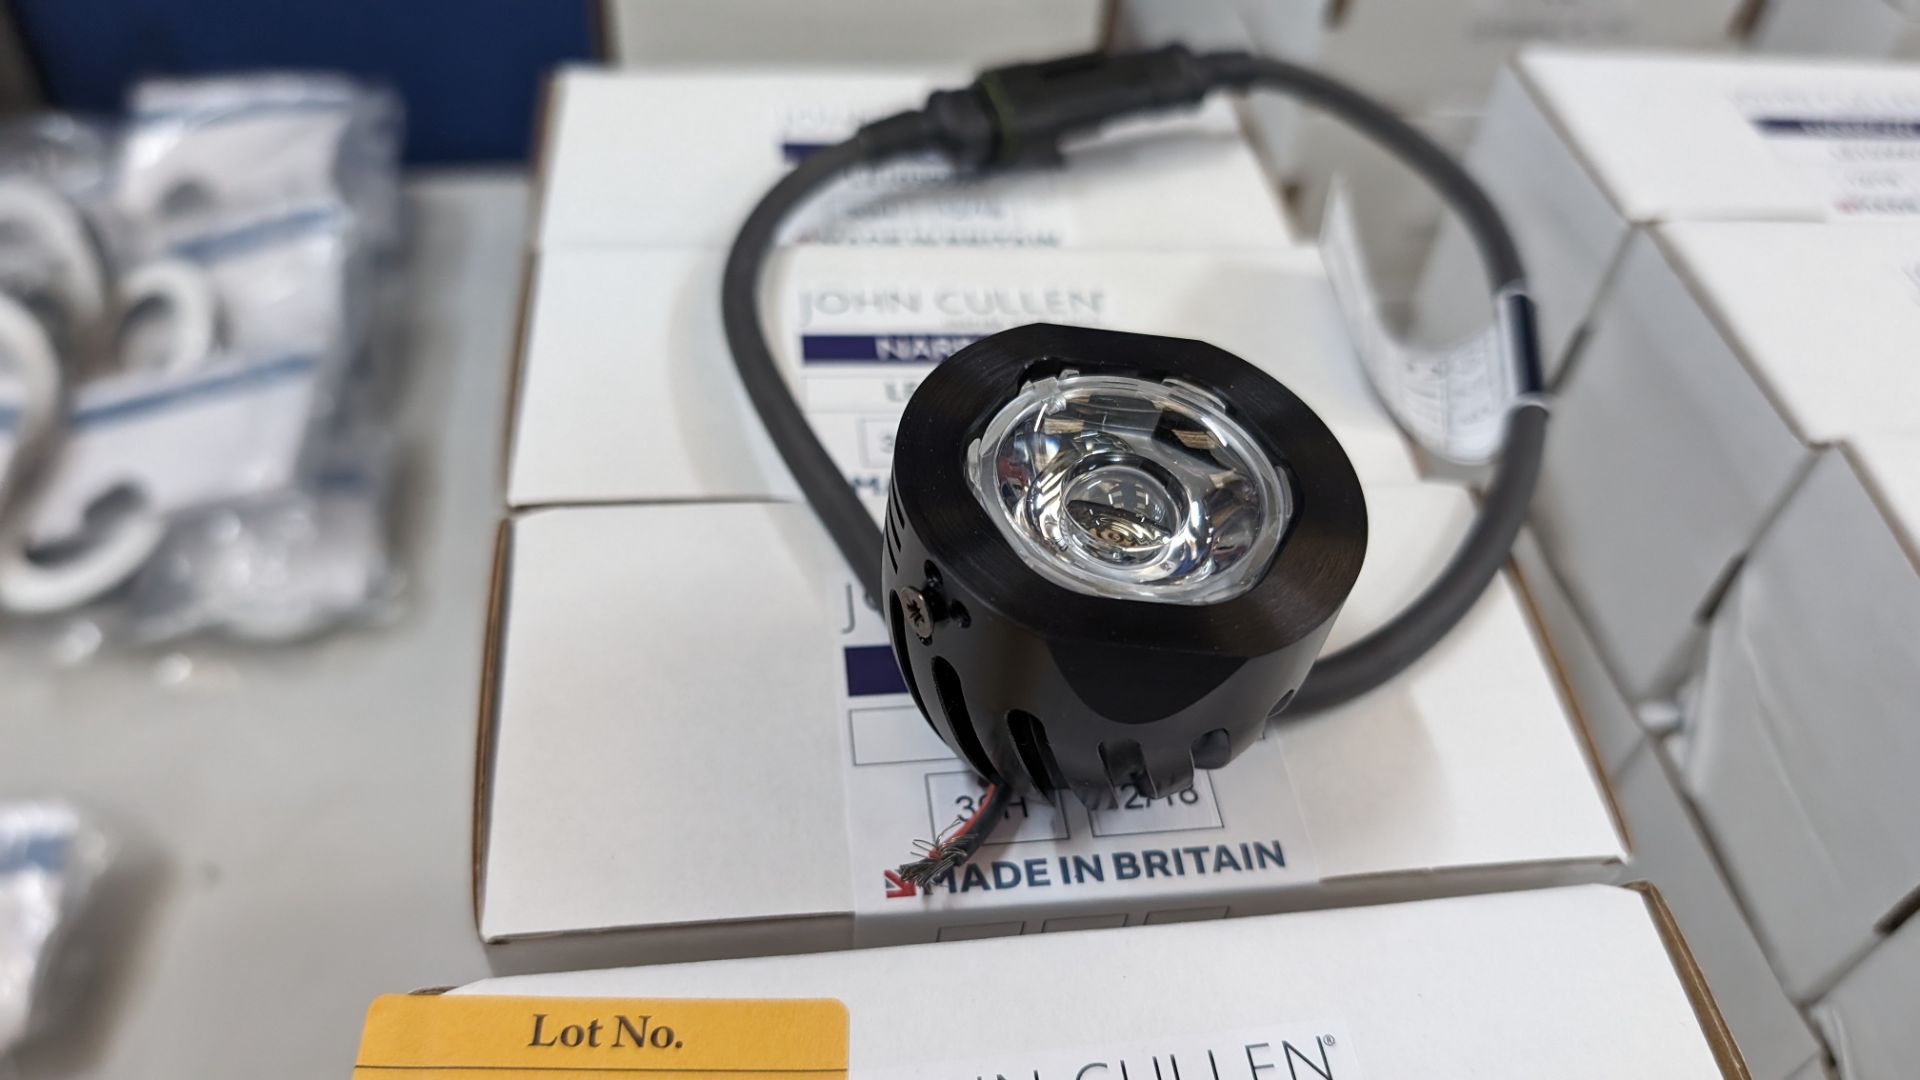 16 off 50mm LED engines, 8.4w, 11.5v, 700mA, 3000k, narrow. Made in Britain - Image 4 of 5